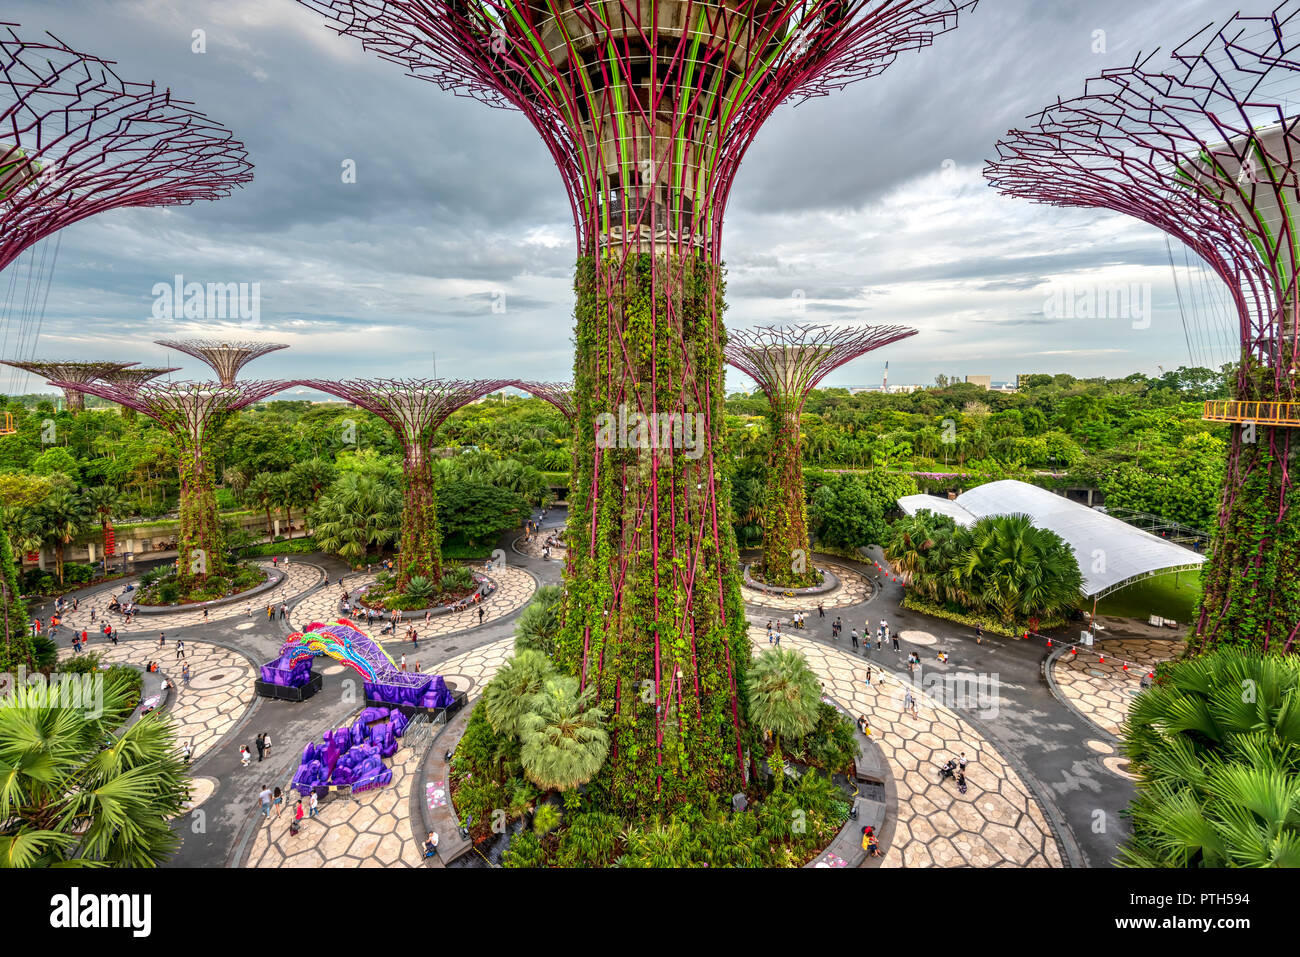 The Supertree Grove at Gardens by the Bay nature park, Singapore Stock Photo